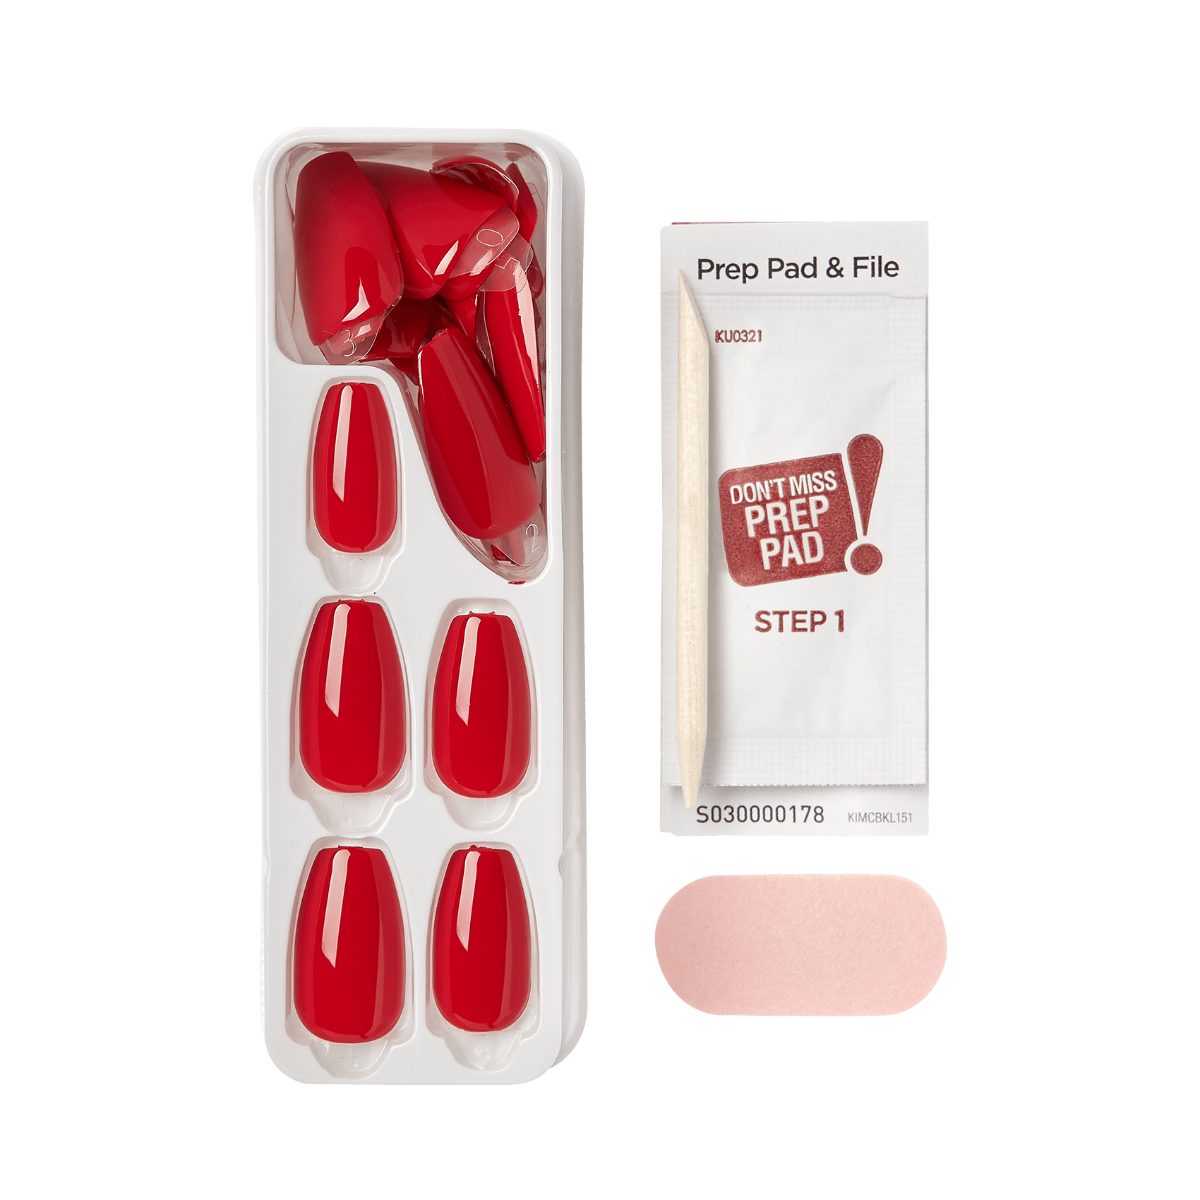 KISS ImPRESS Color Press-On Manicure - Reddy or Not - Taille M